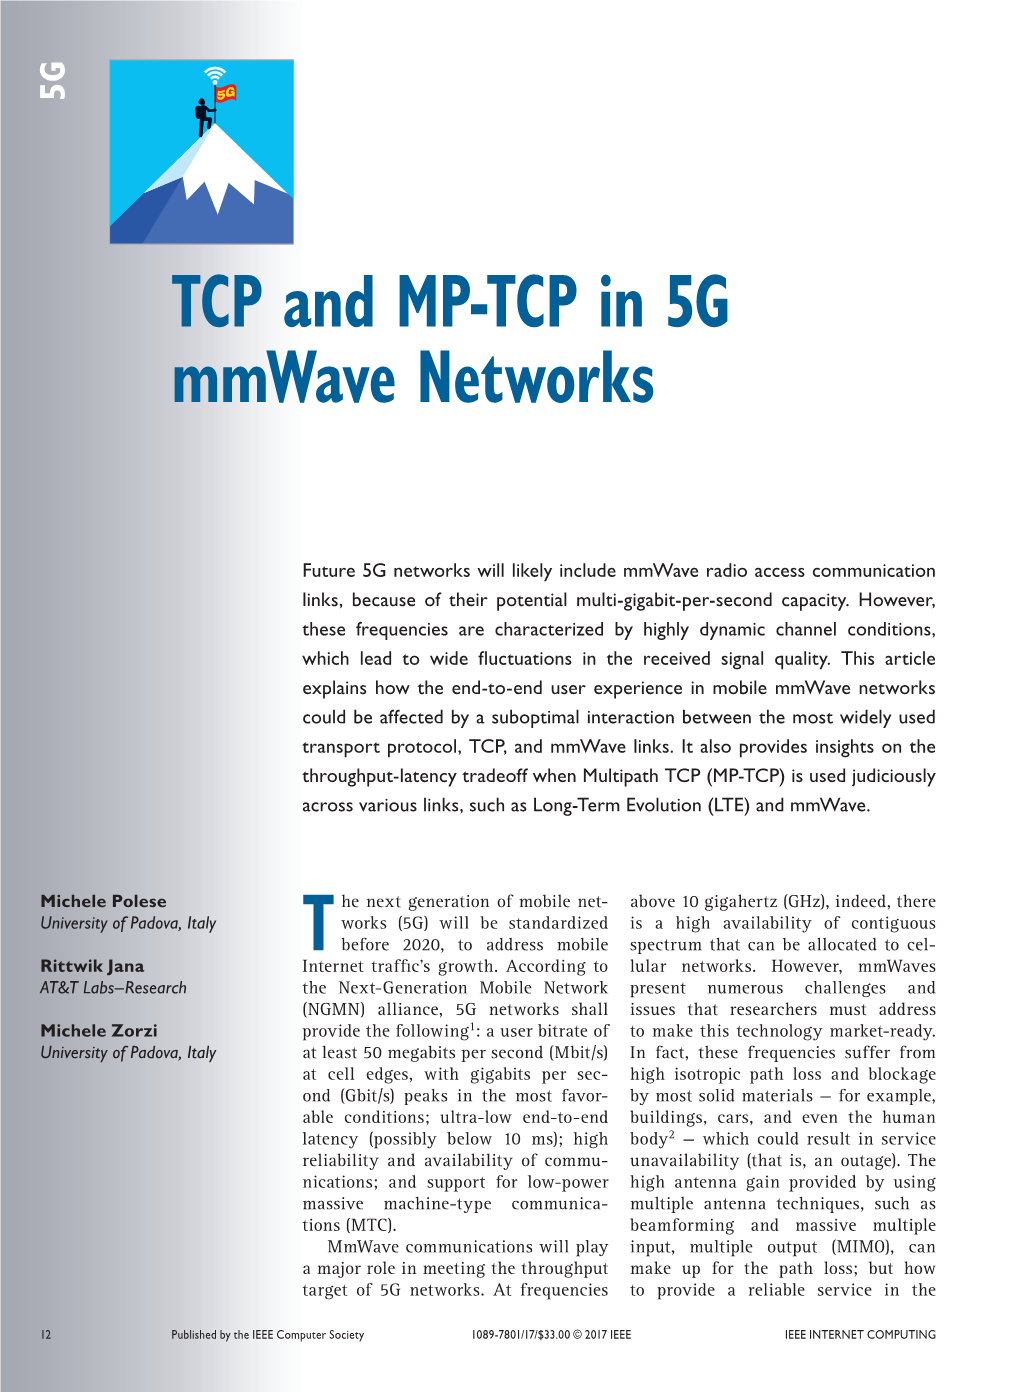 TCP and MP-TCP in 5G Mmwave Networks